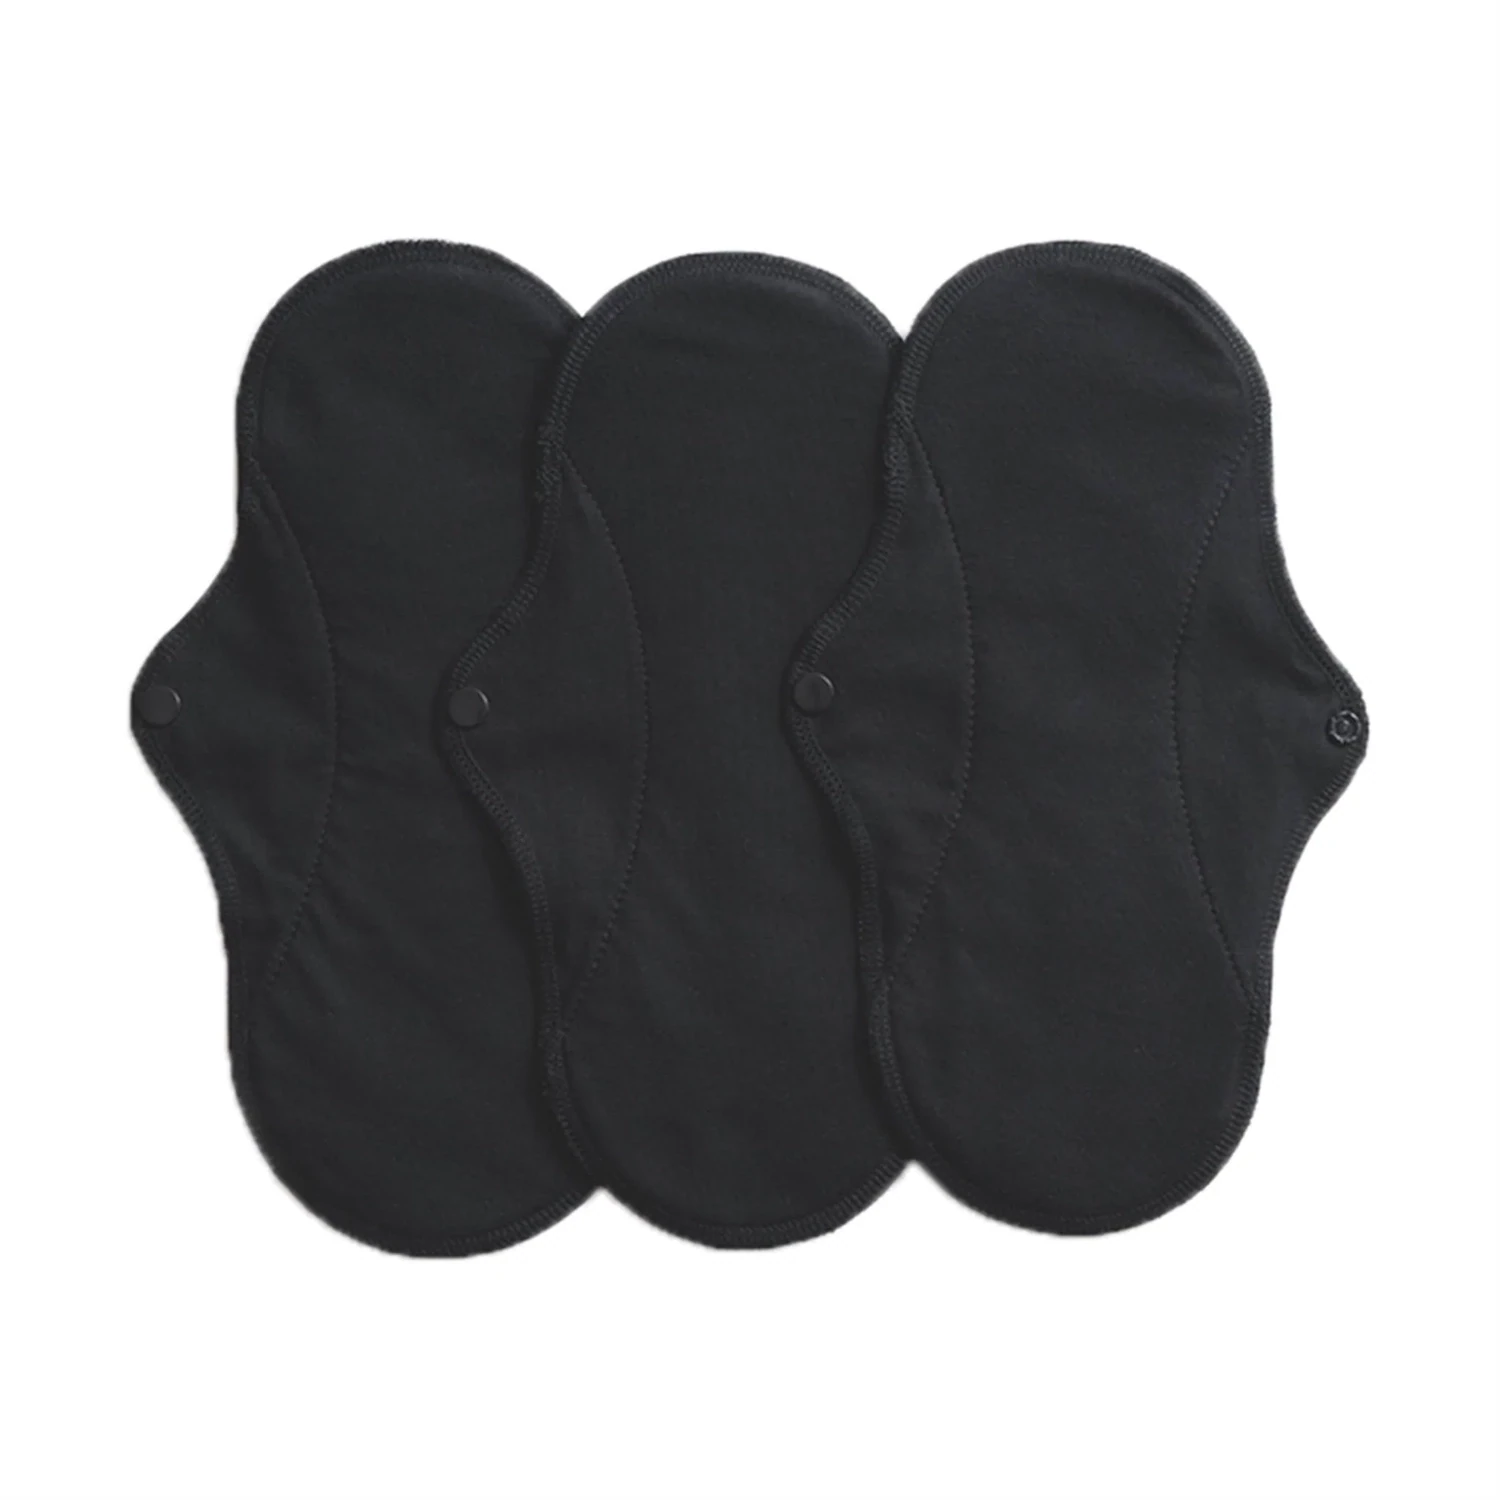 Reusable Panty Liners 3 Pack Classic Black